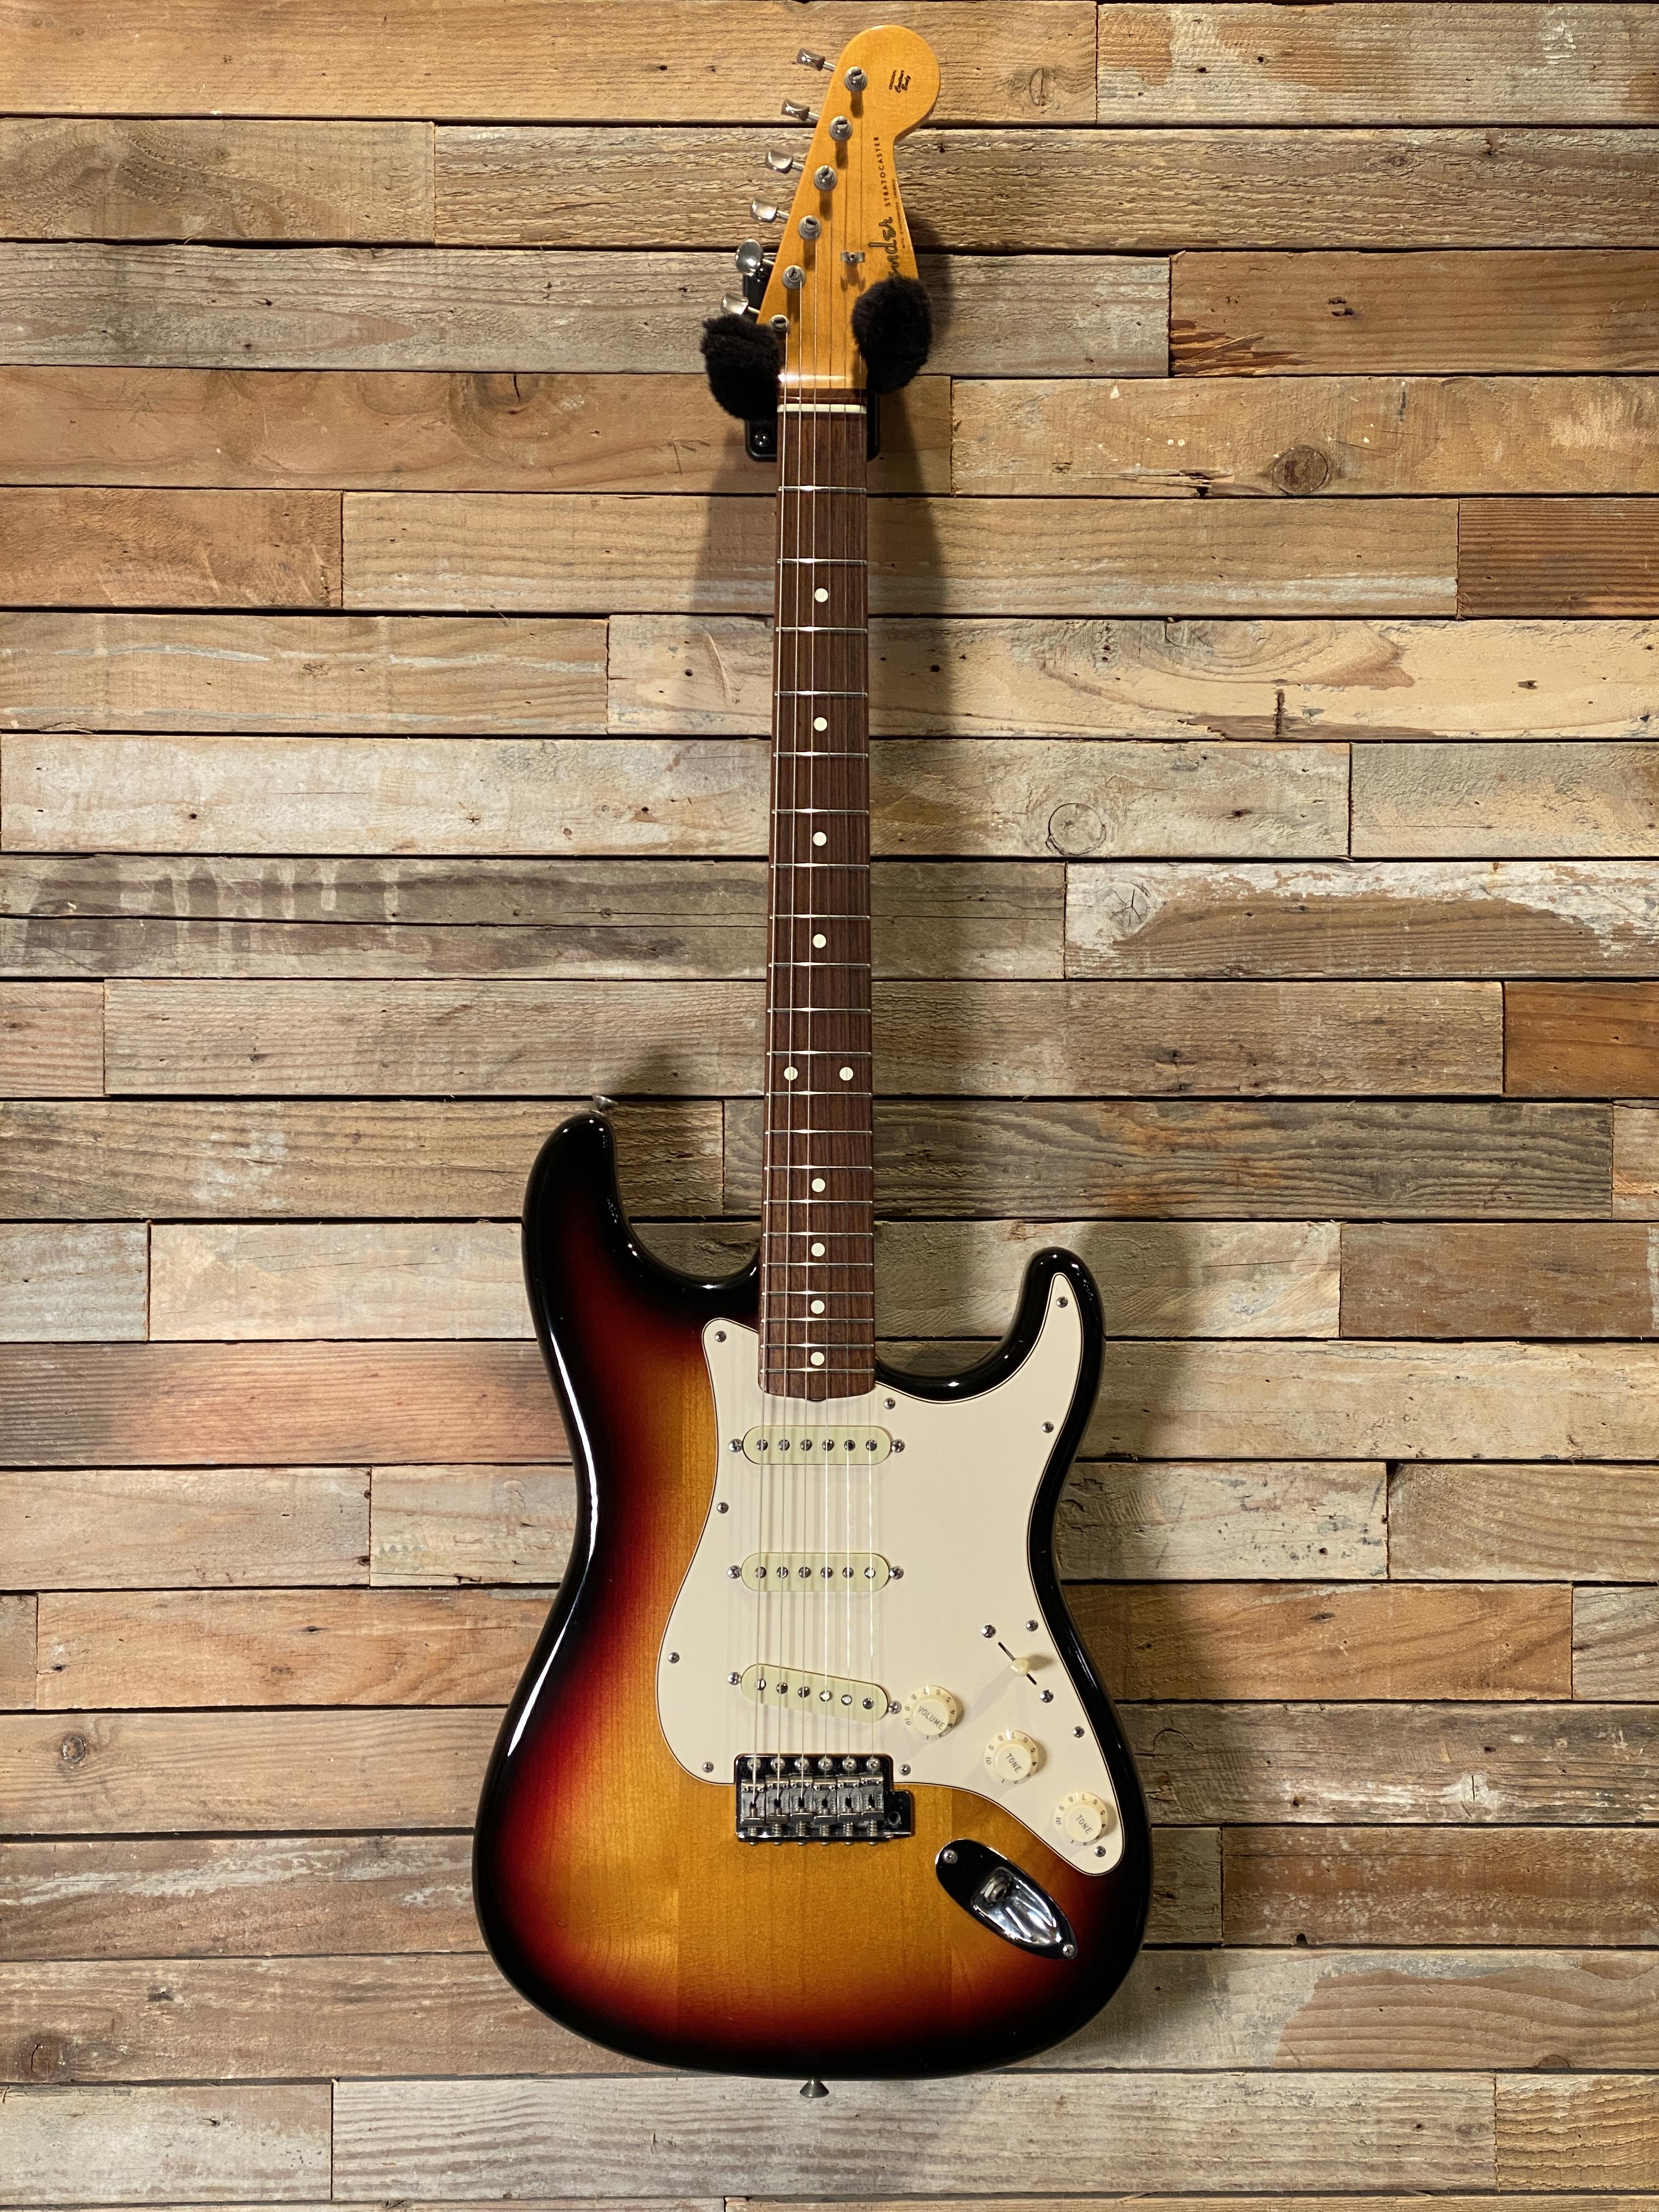 Fender American Vintage '62 Stratocaster | ncrouchphotography.com